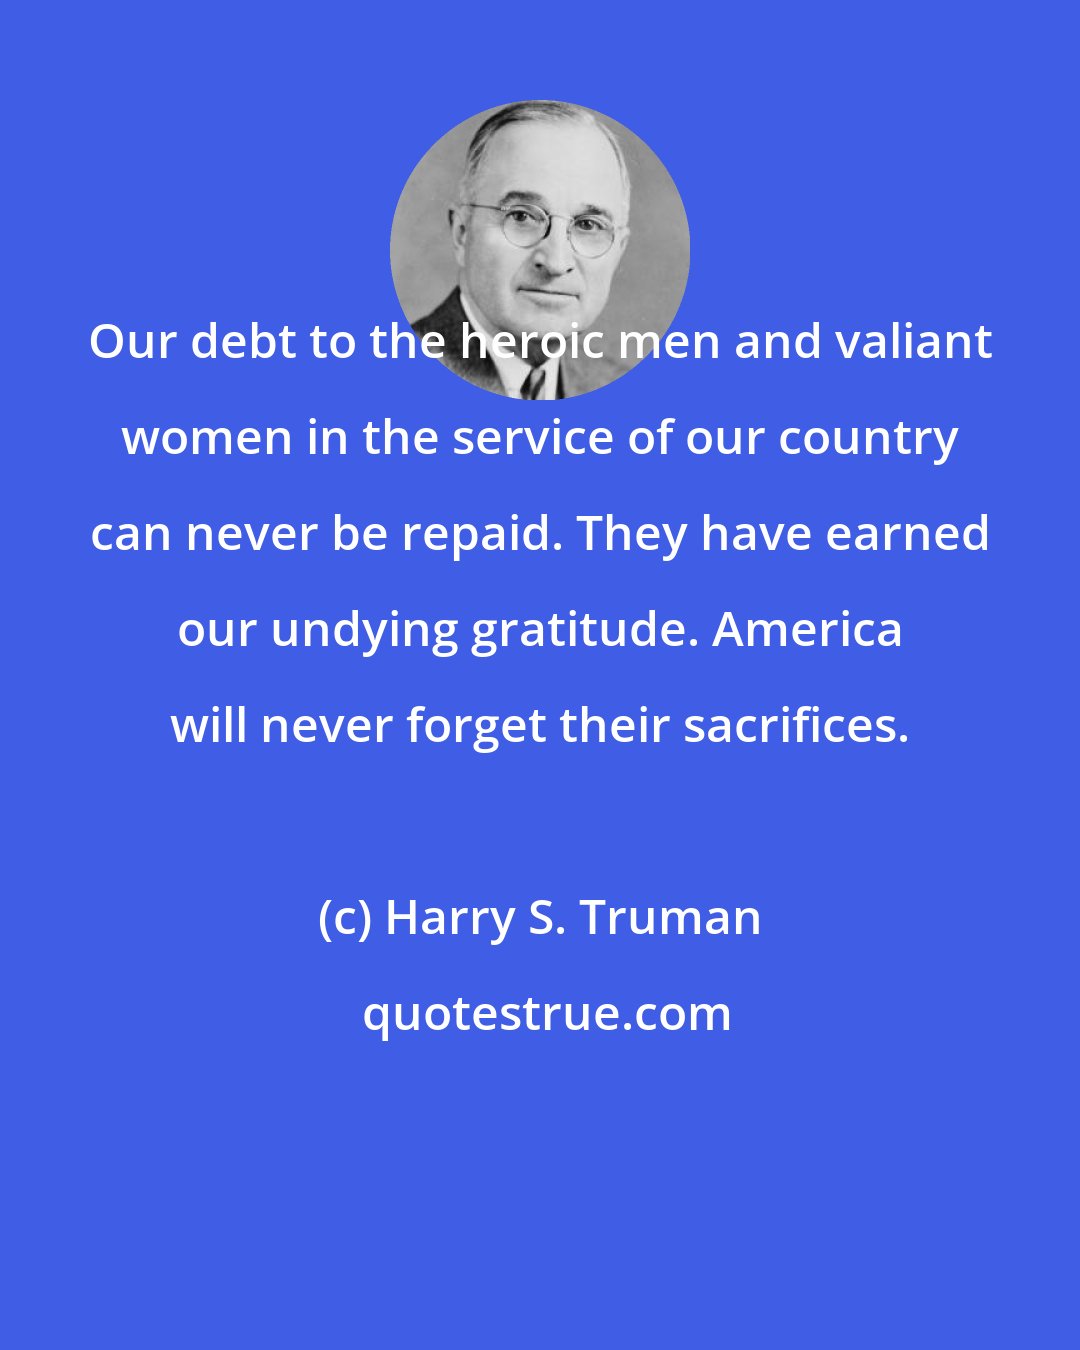 Harry S. Truman: Our debt to the heroic men and valiant women in the service of our country can never be repaid. They have earned our undying gratitude. America will never forget their sacrifices.